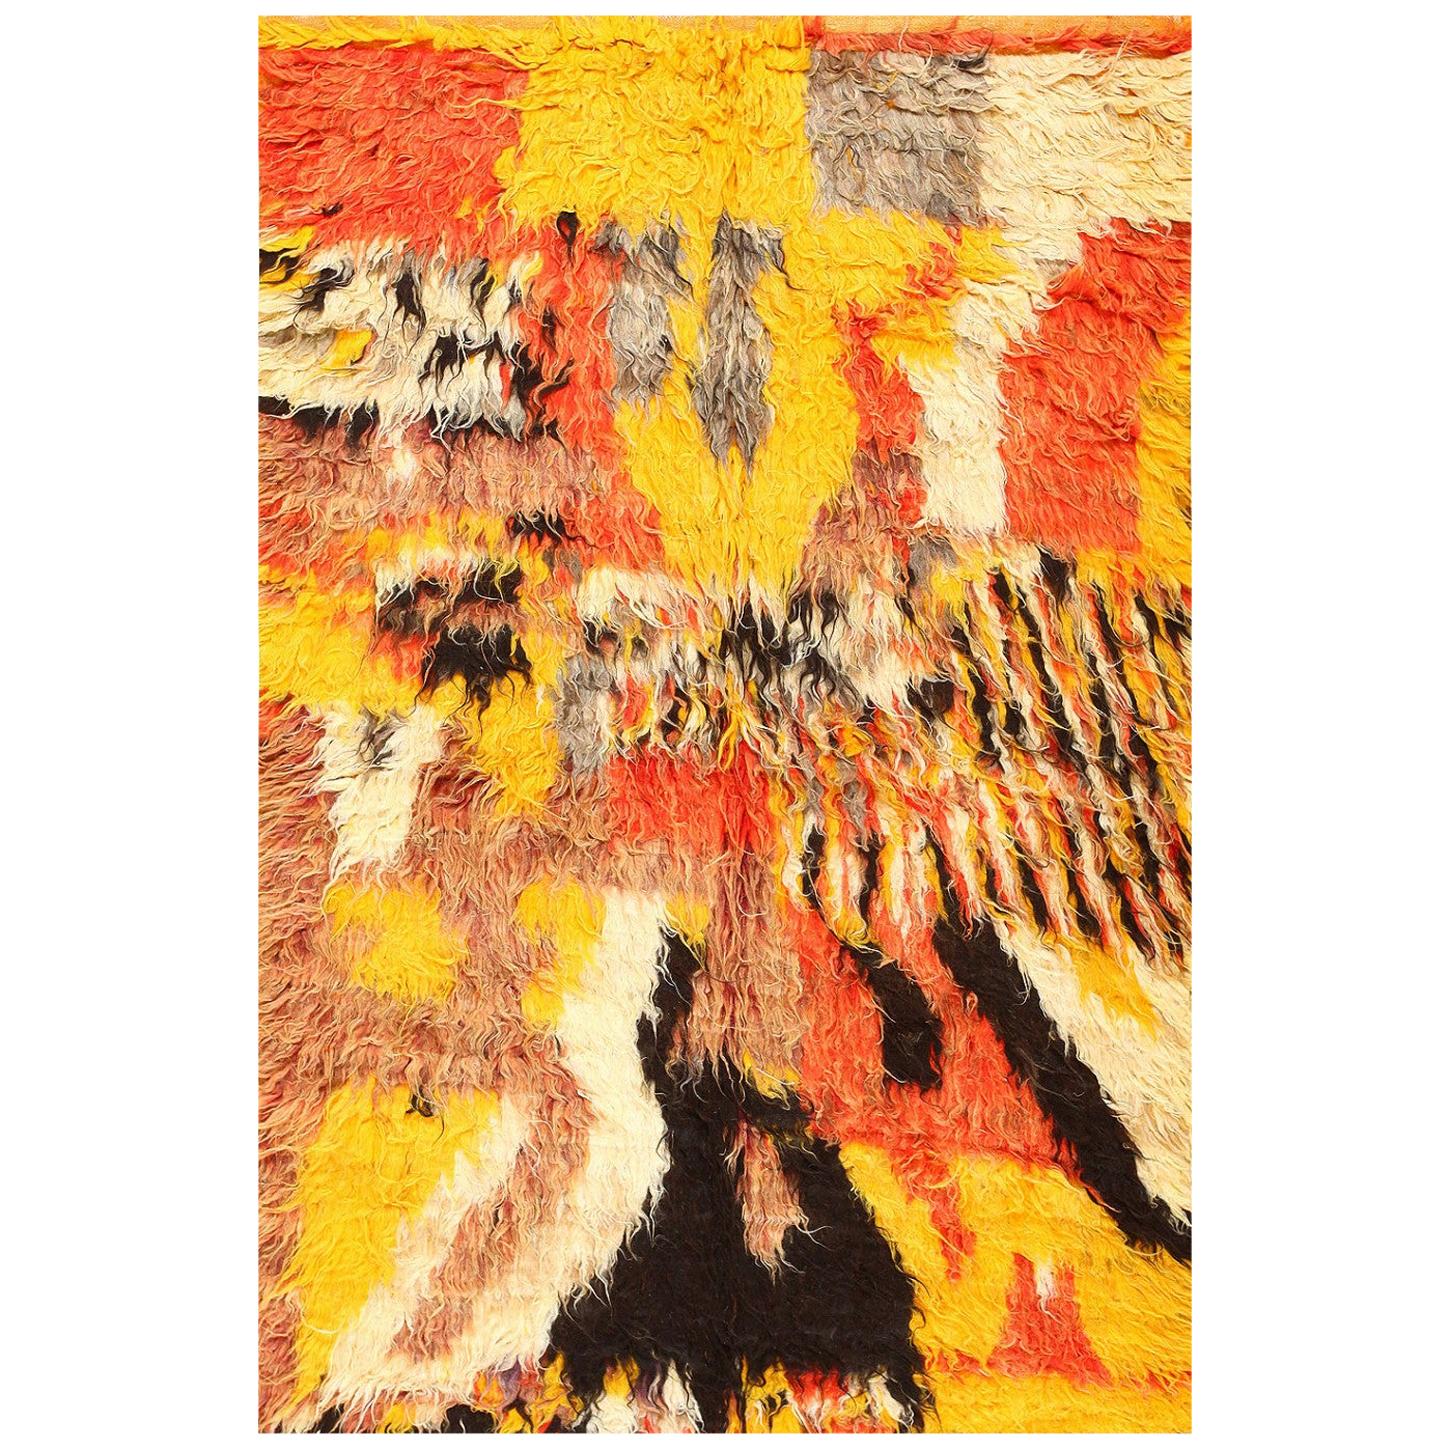 Moroccan Shag Rug. Size: 5 ft 5 in x 8 ft (1.65 m x 2.44 m)